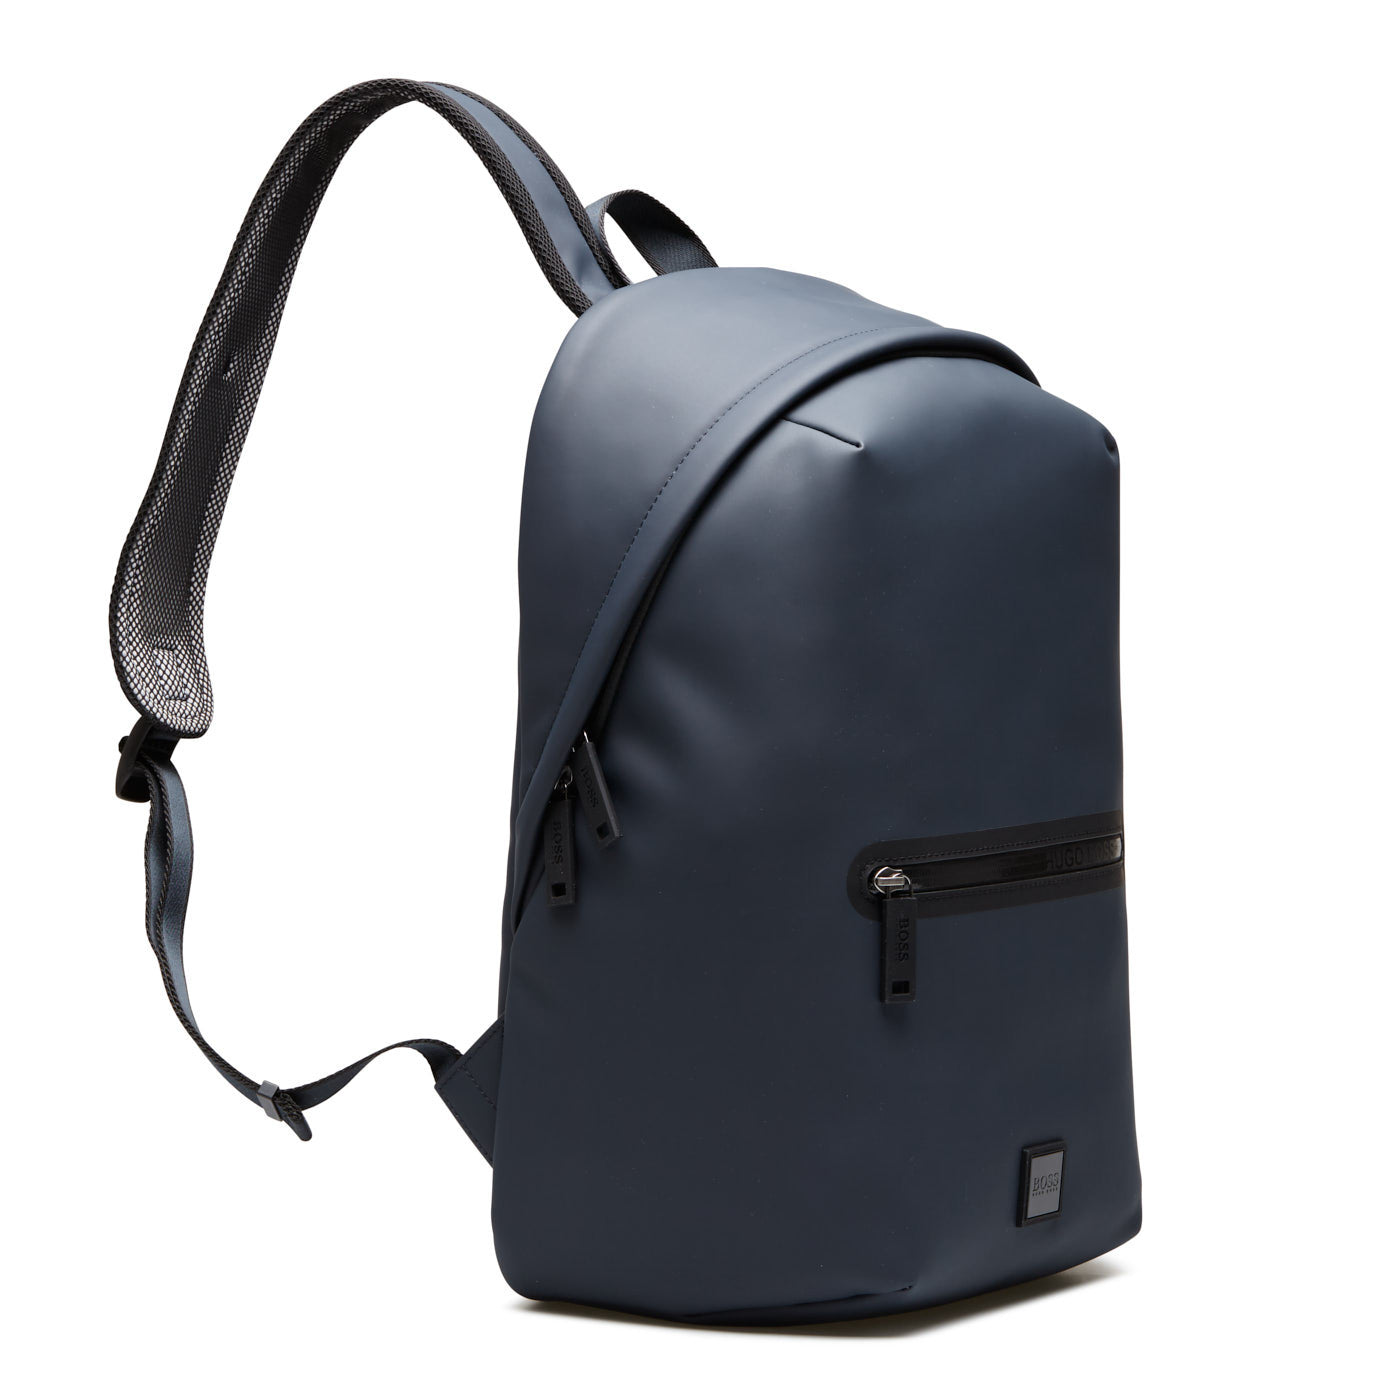 RUBBERISED-FABRIC BACKPACK WITH LAPTOP POCKET AND SMART SLEEVE - Yooto